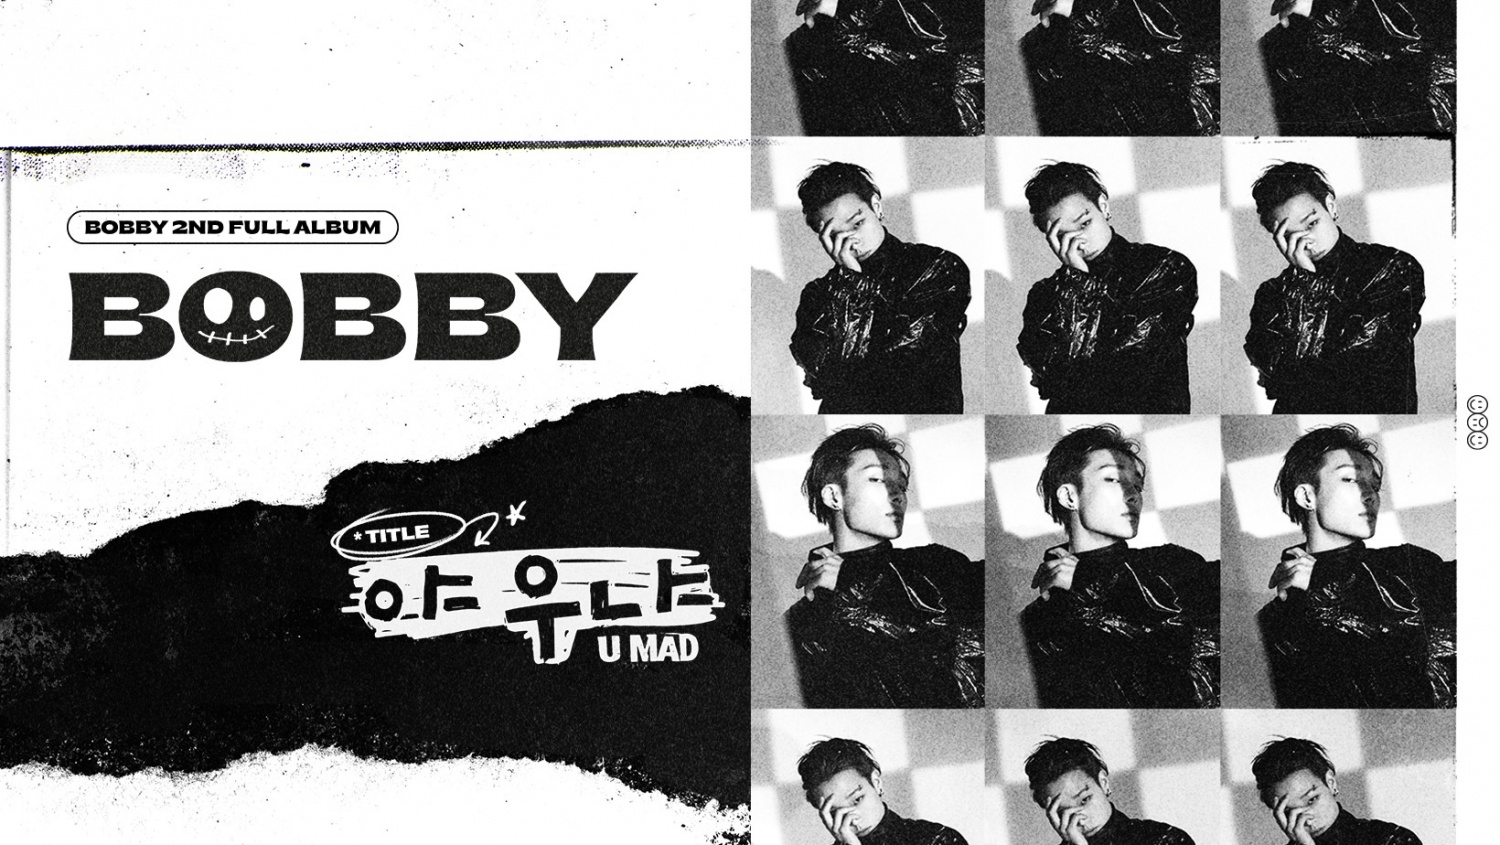 Bobby's 2nd solo album 'LUCKY MAN', top 12 countries on iTunes